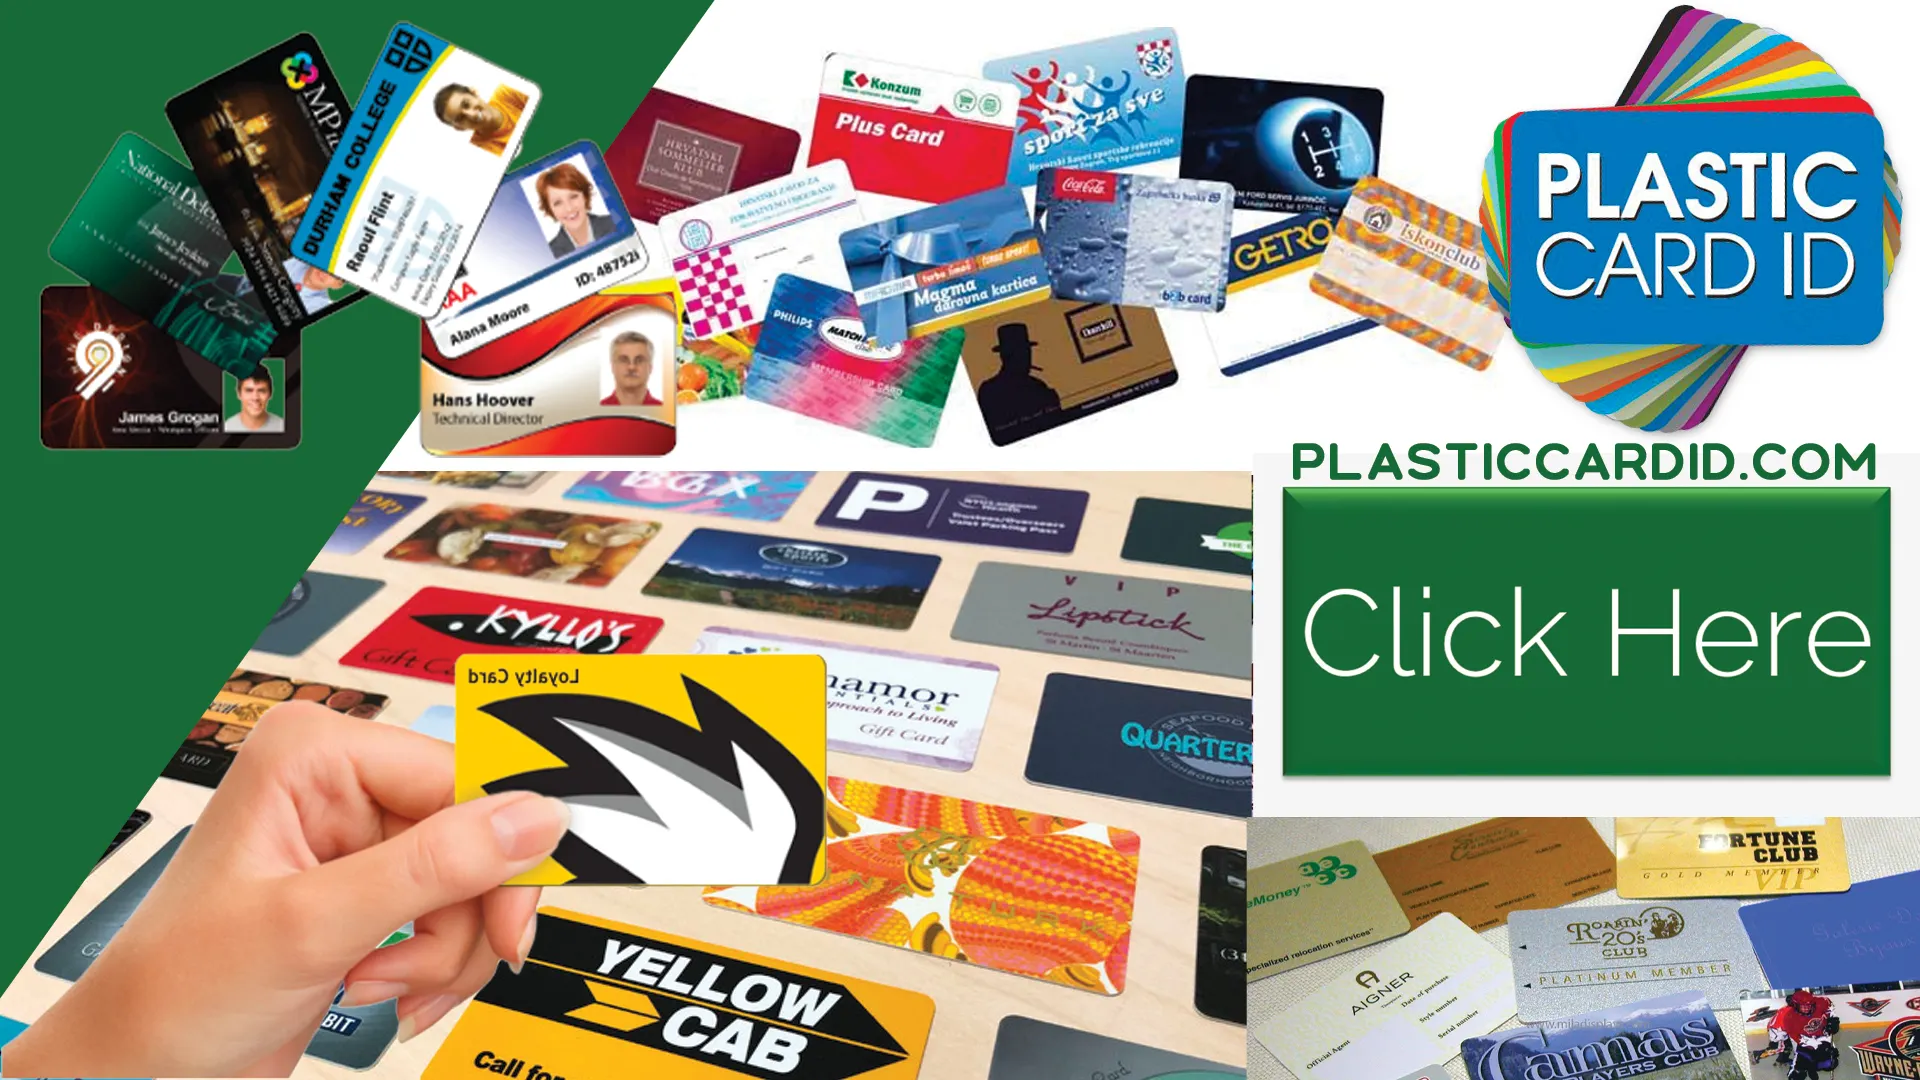 Exploring the Versatility of Our Plastic Card Offerings